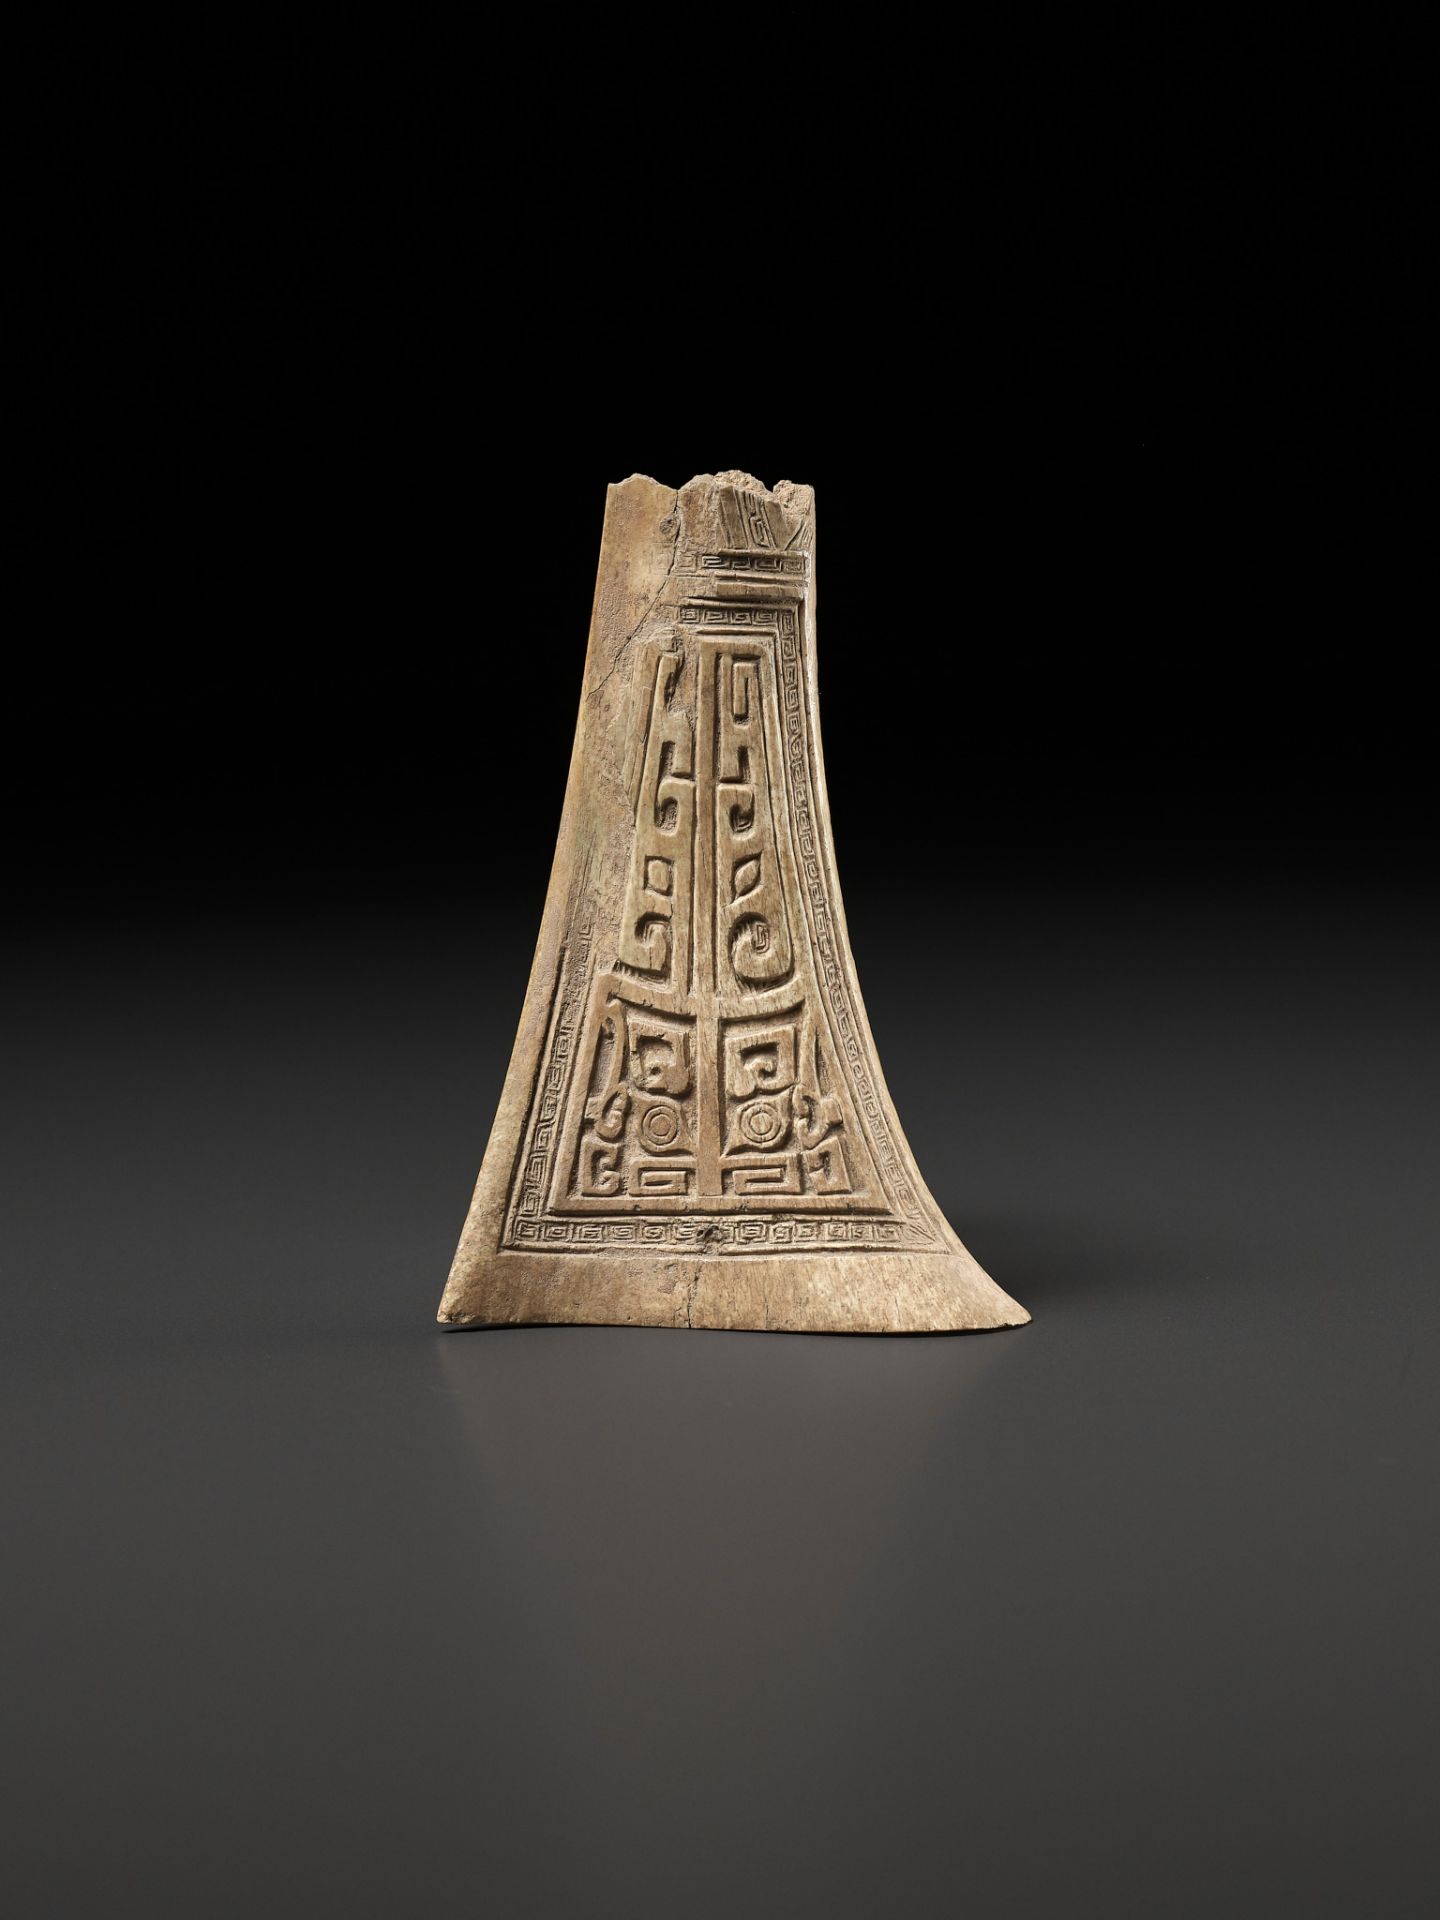 AN ARCHAIC CEREMONIAL BONE CARVING, SHANG DYNASTY - Image 17 of 17